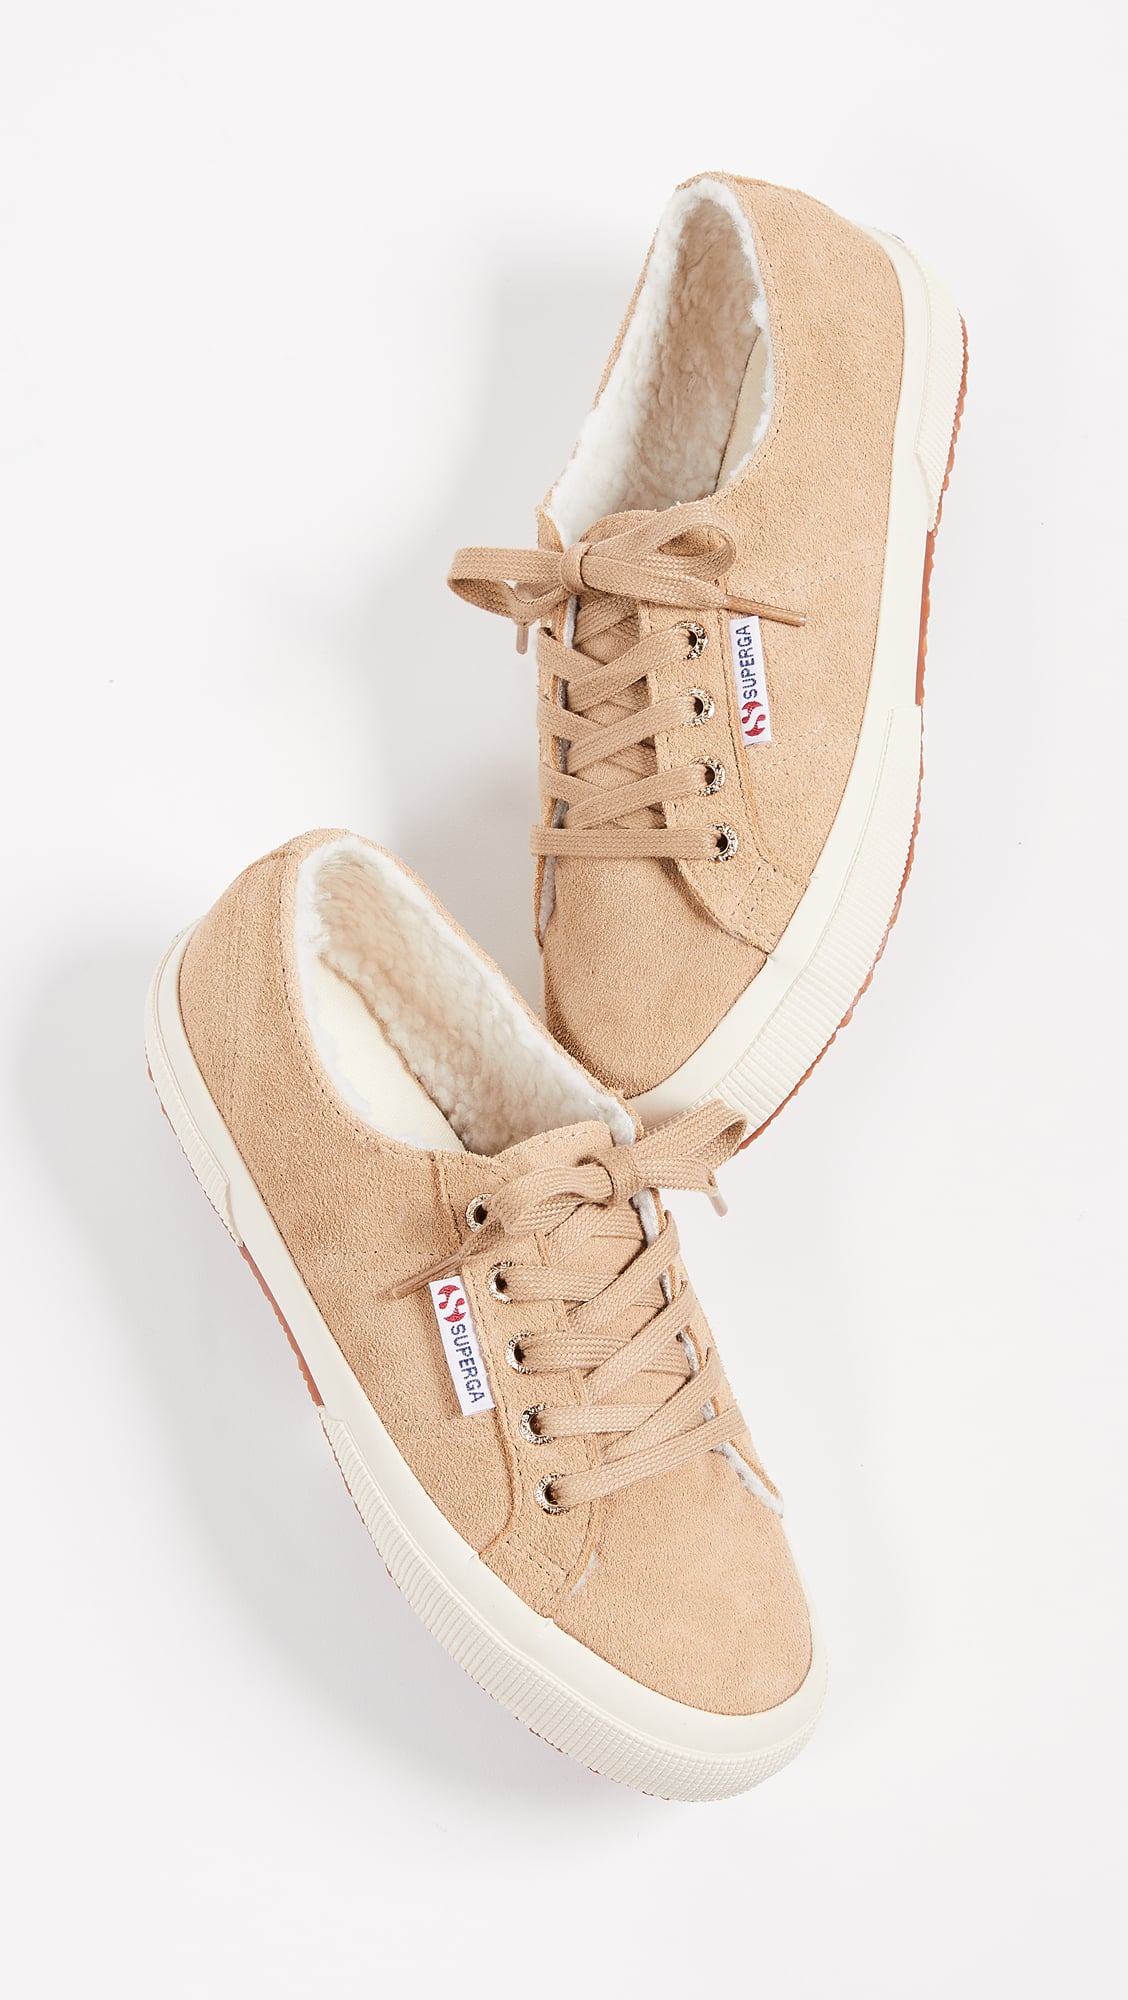 Superga 2750 Suede Lace Up | Say Hello to September With Our Fall Must Haves at Every Price | POPSUGAR Fashion Photo 8